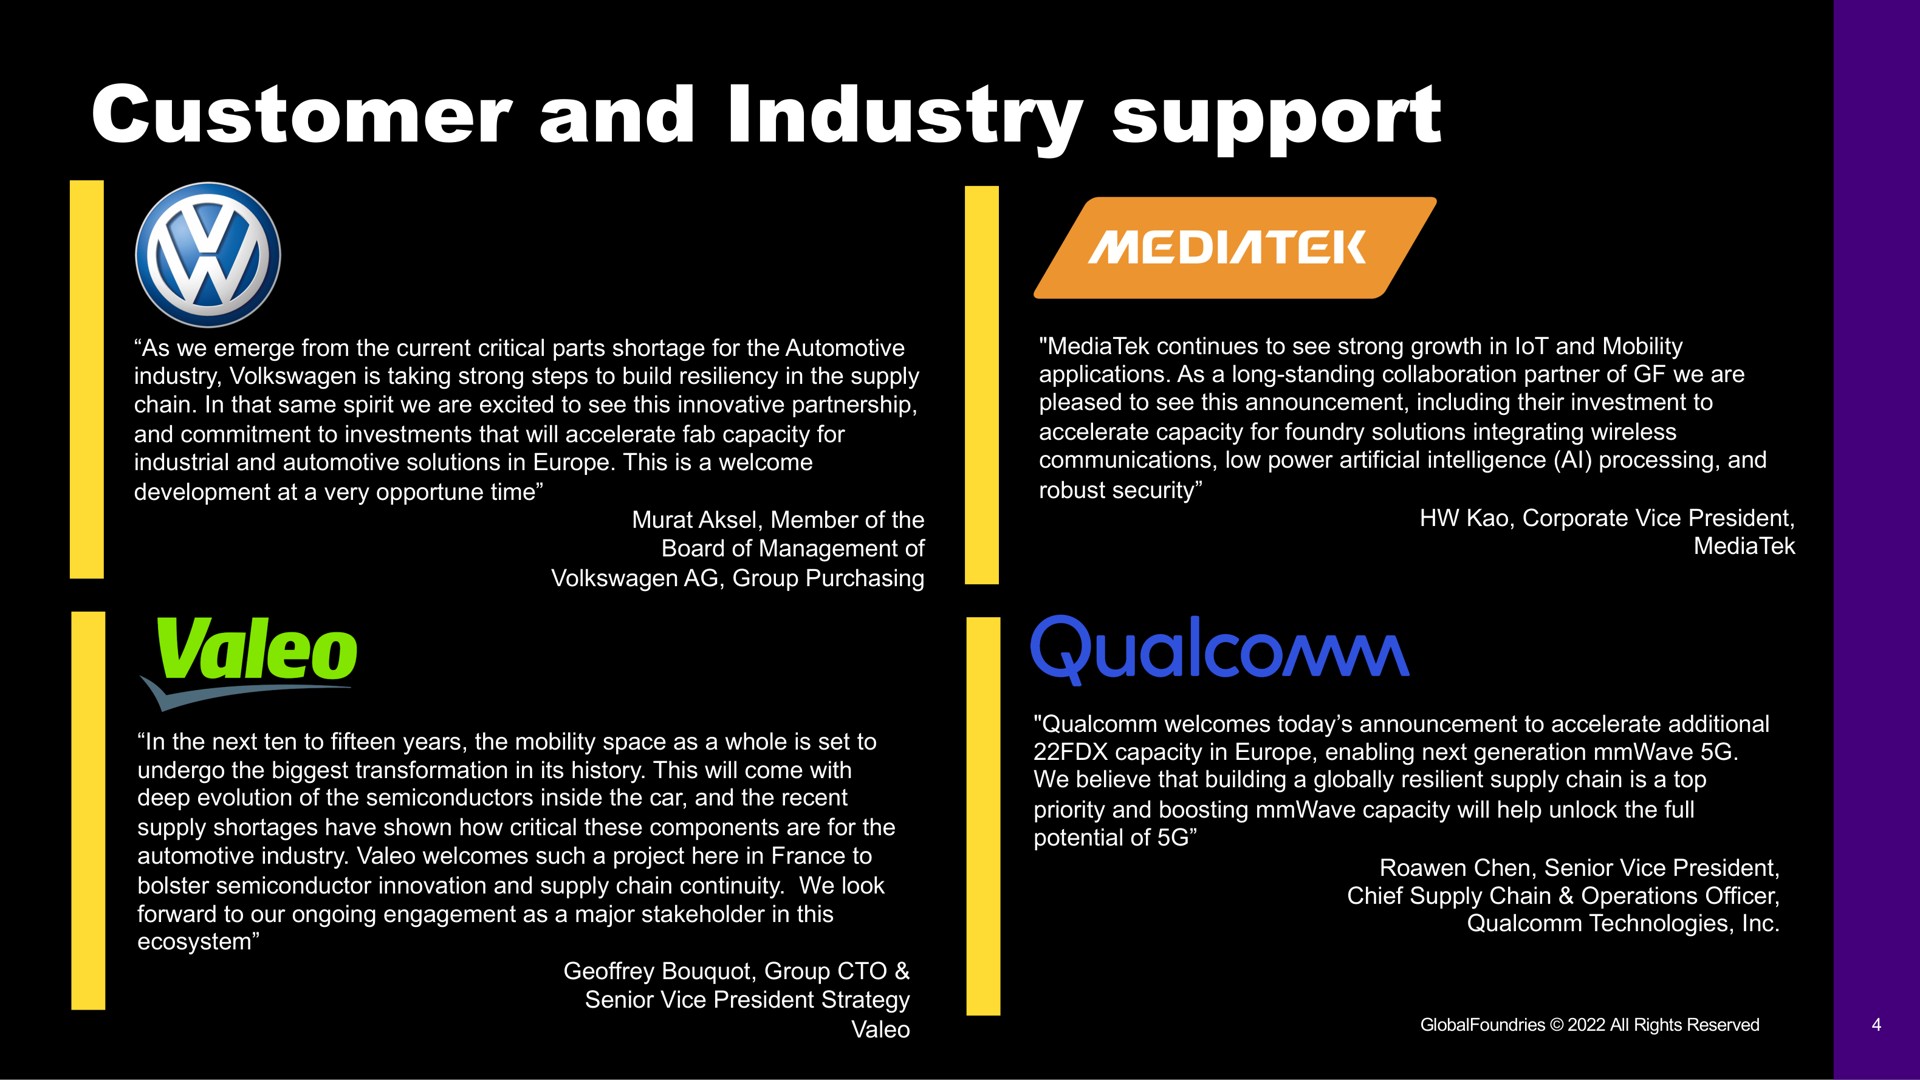 customer and industry support | GlobalFoundries